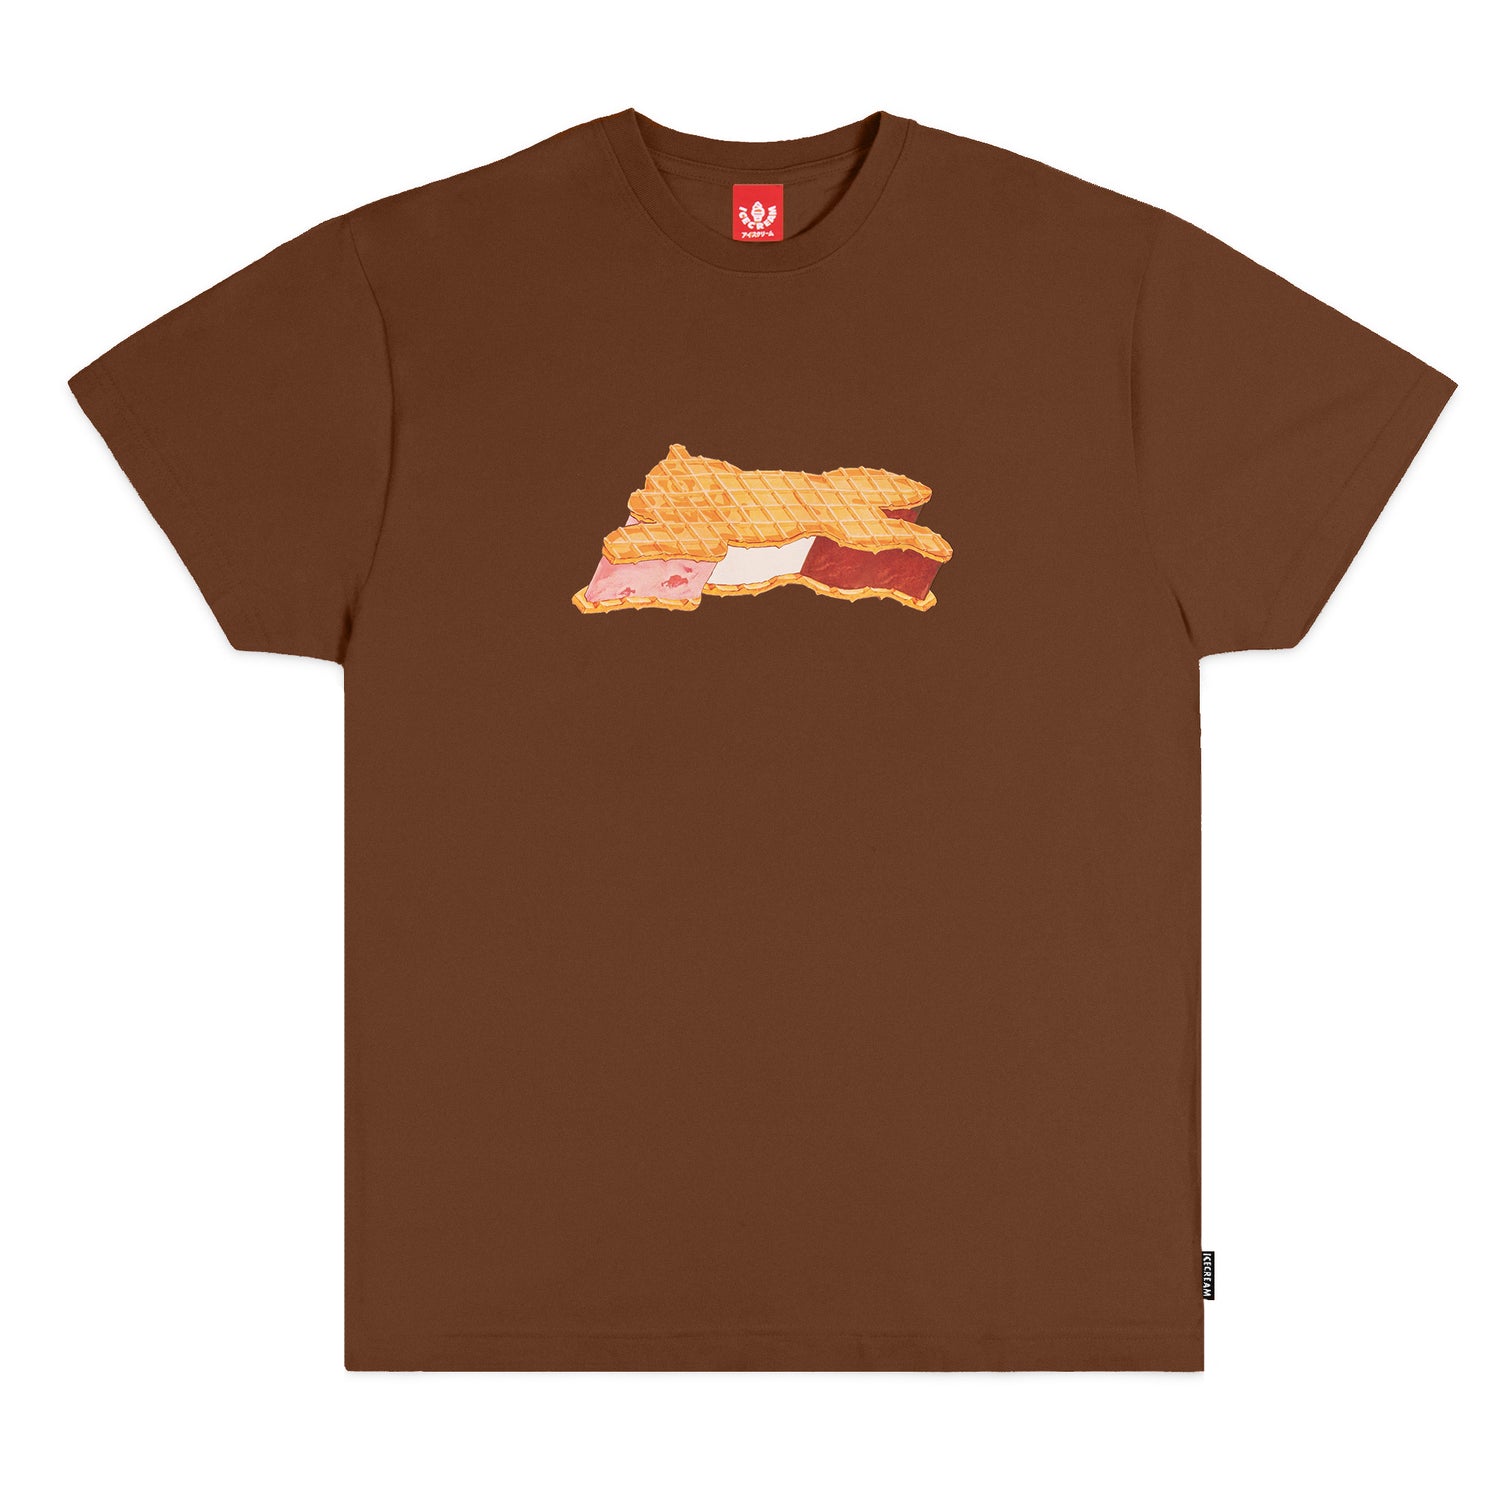 YUMMY SS TEE - BISON